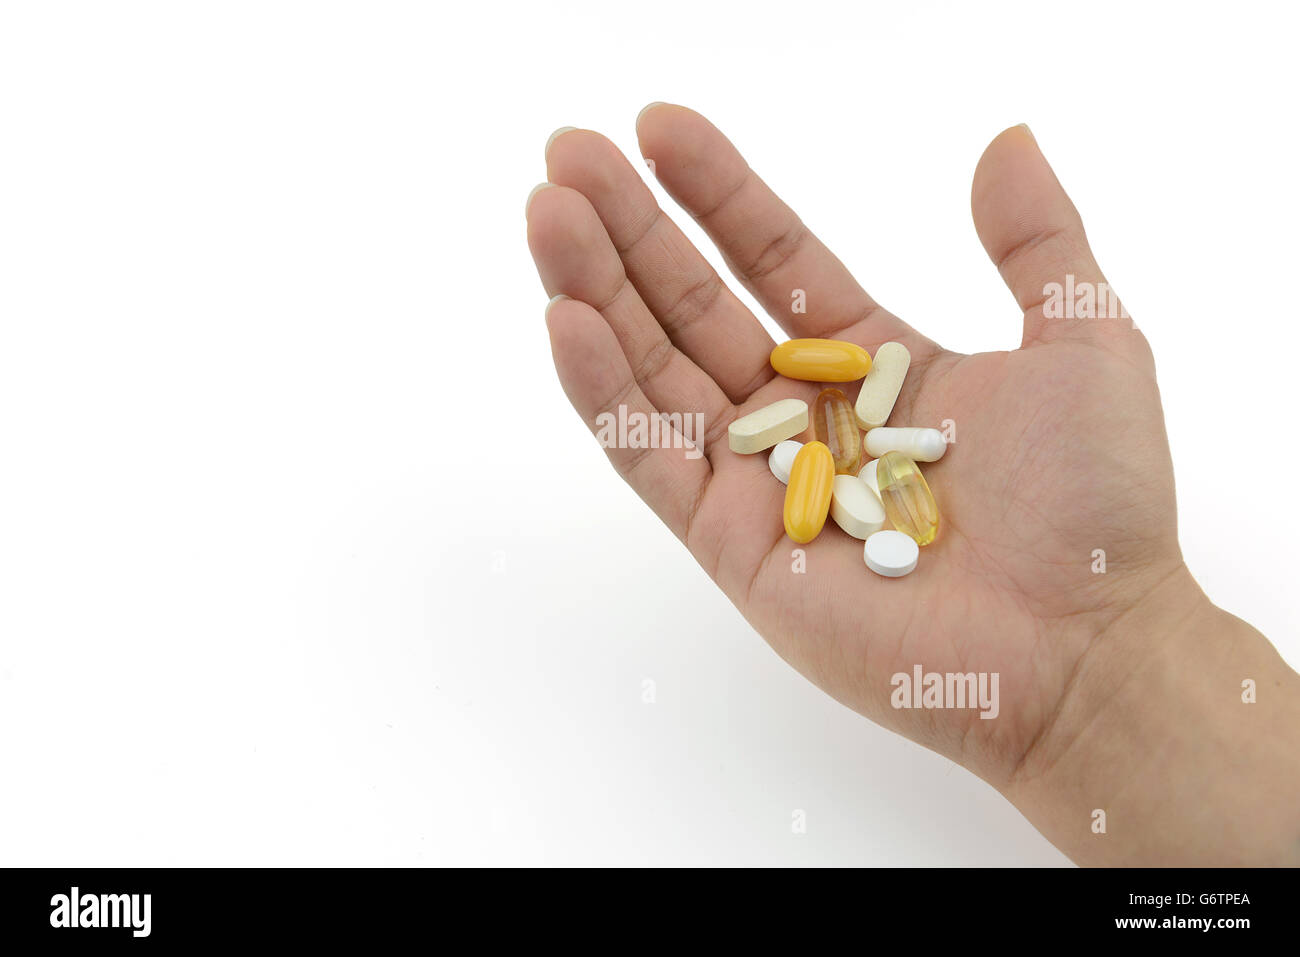 Bear hand of patient preparing medicine and vitamin to take Stock Photo